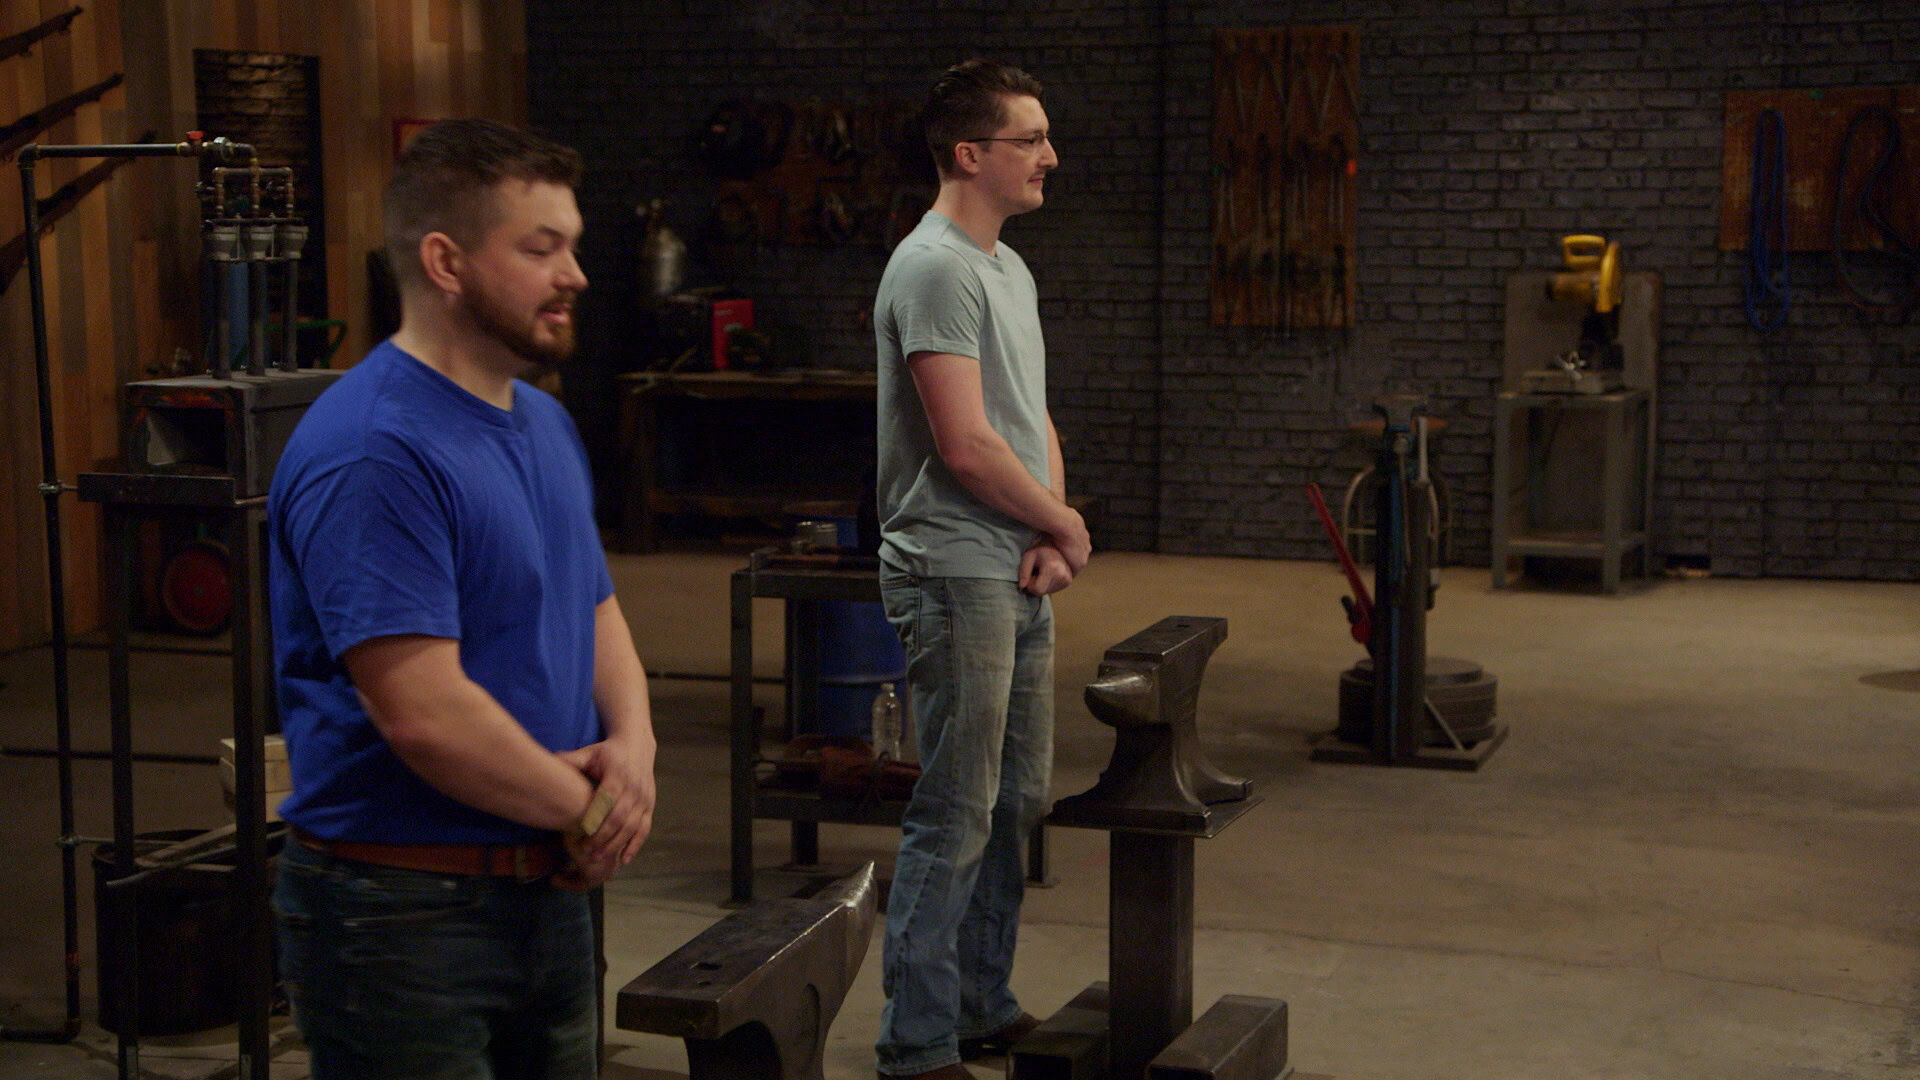 forged in fire season 6 episode 9